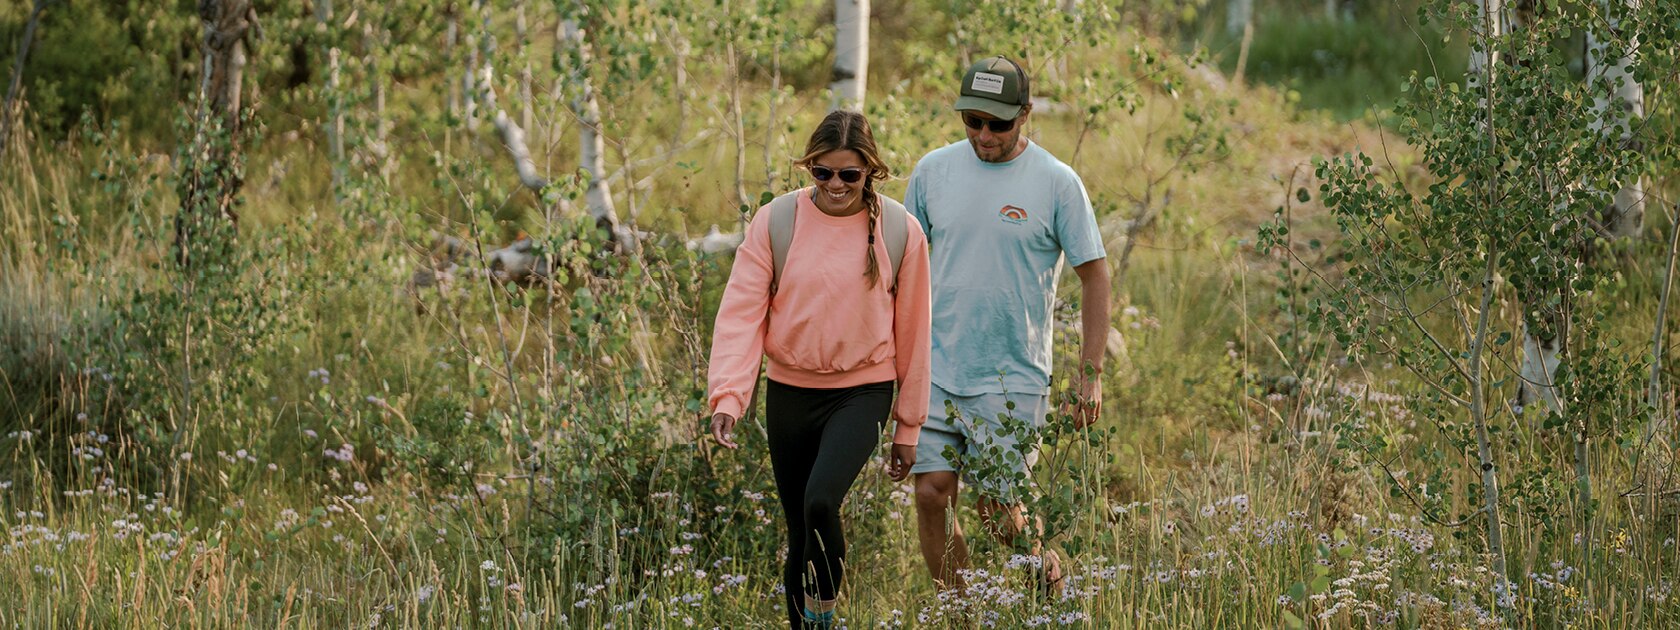 man and woman wearing polarized sunglasses walking on a grassy trail